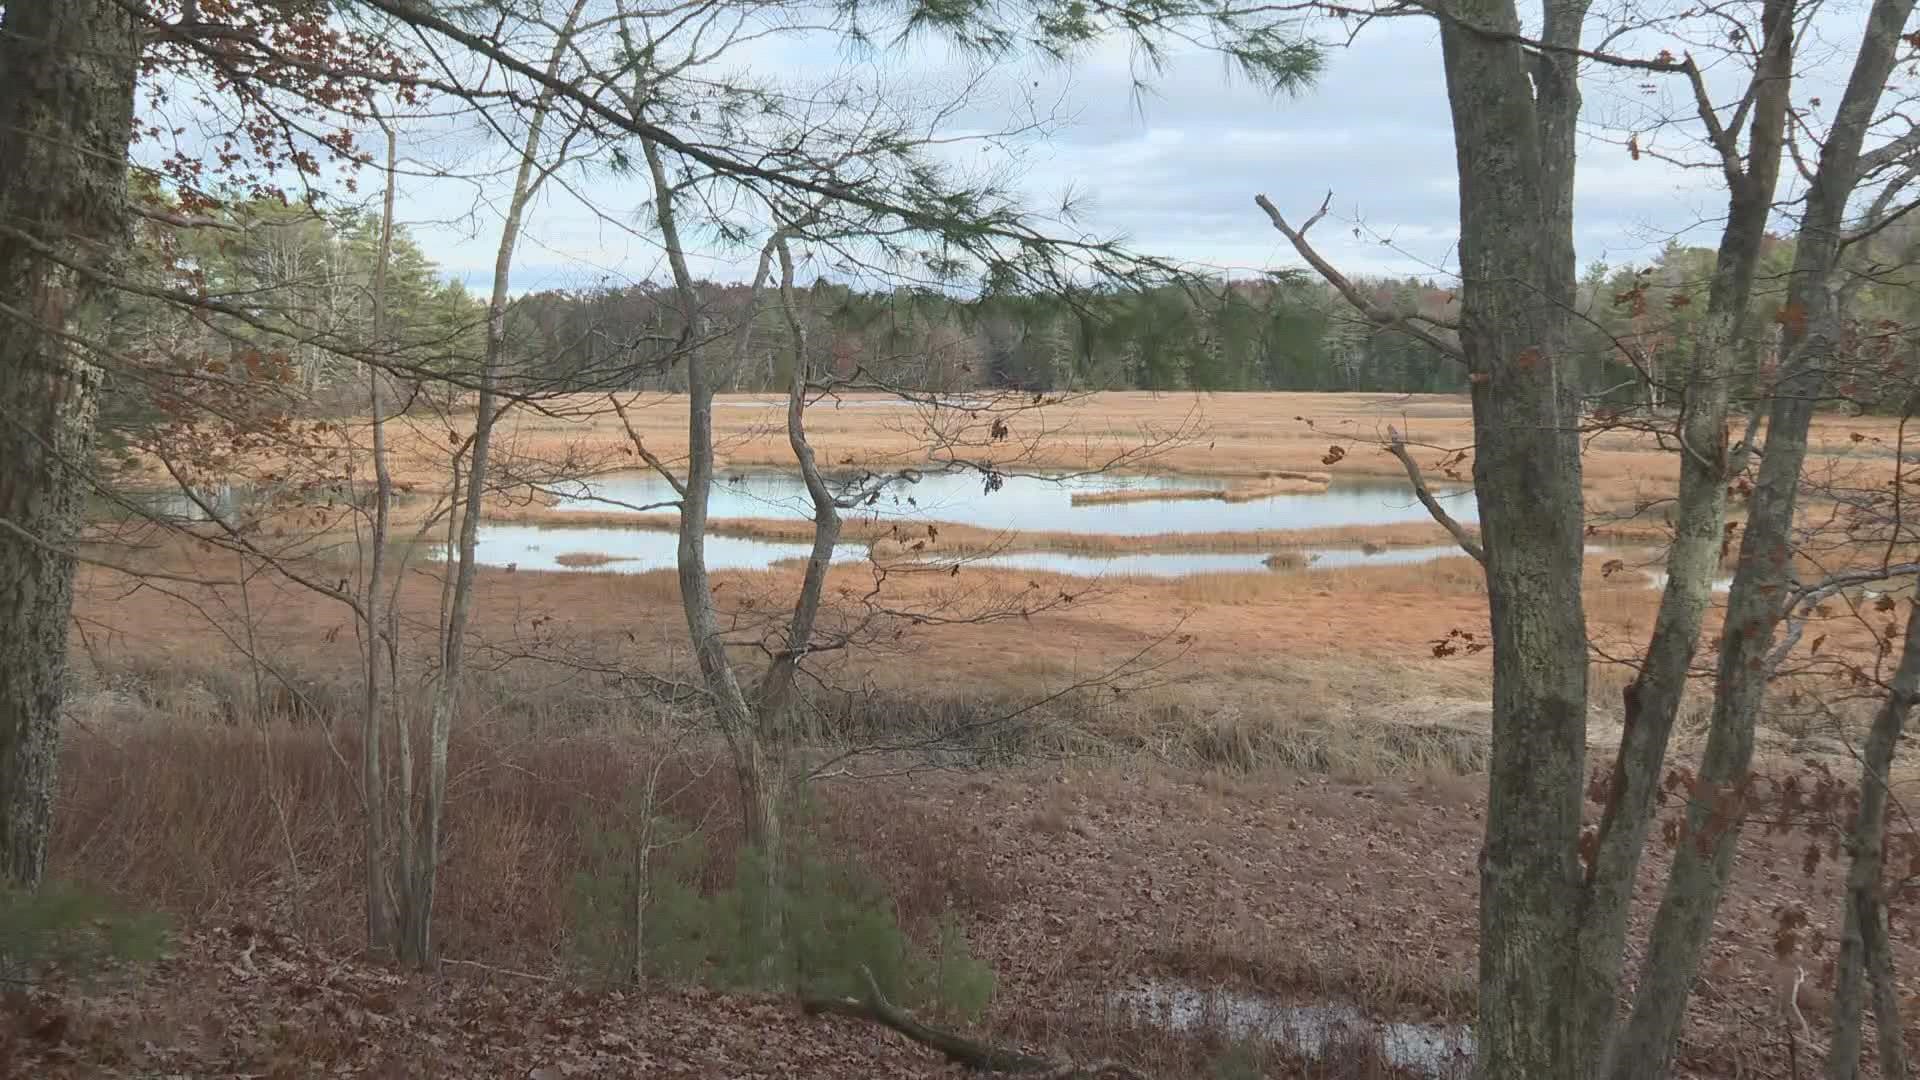 Rep. Pingree said the money will help pay for the state’s Cousins River Fields and the Marsh Conservation Project, which will protect about 43 acres in Casco Bay.